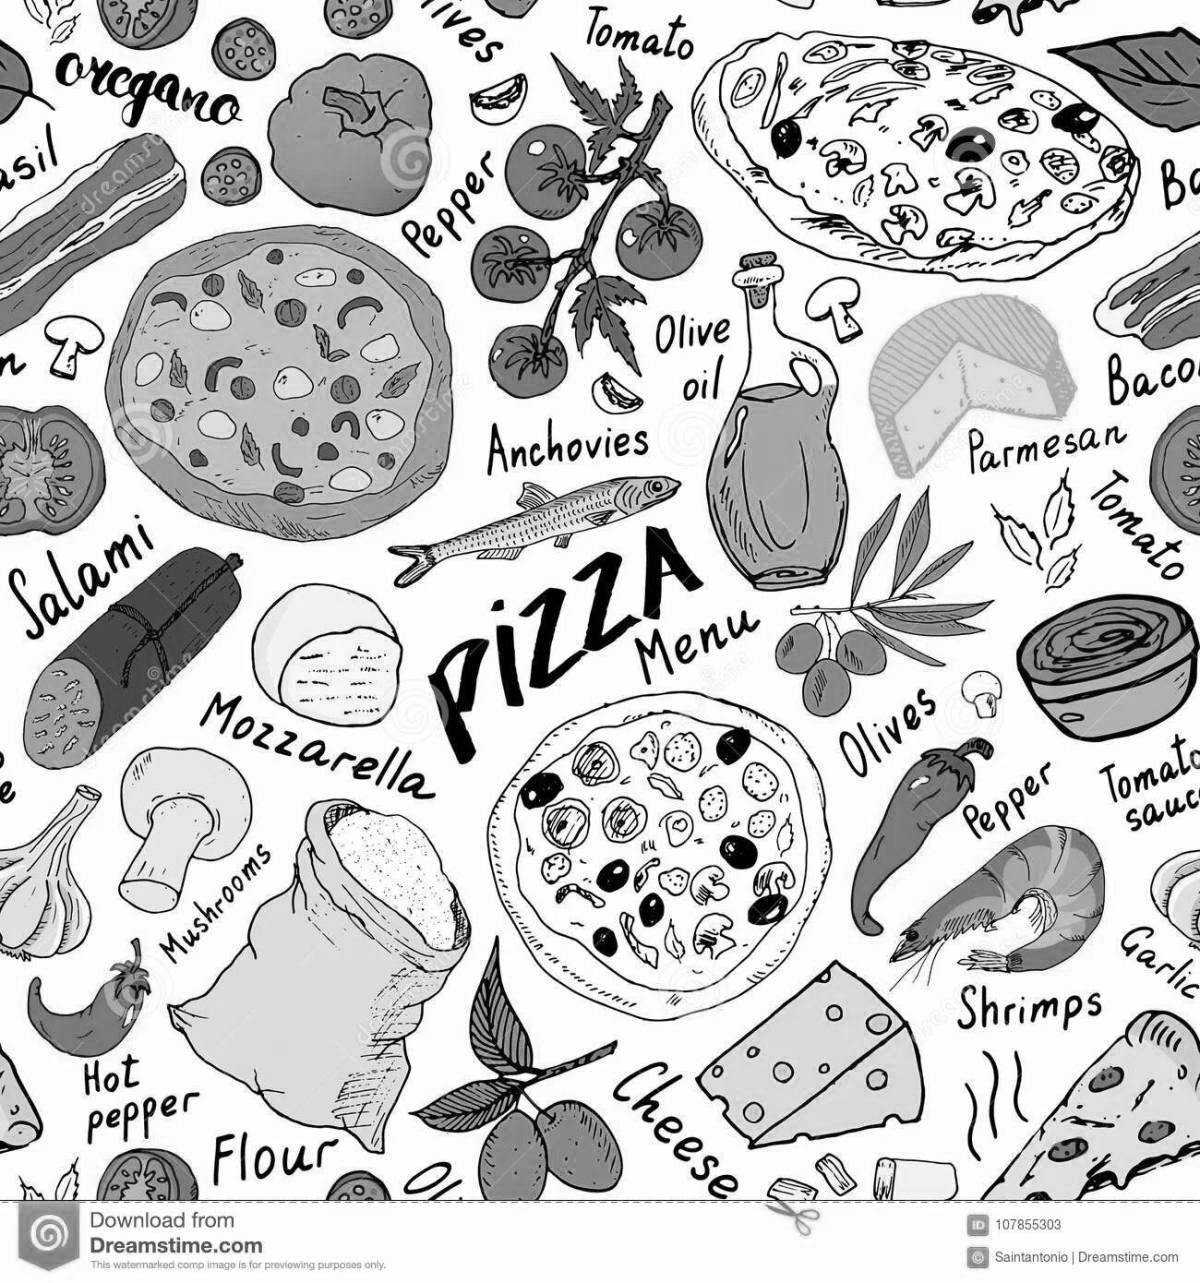 Adorable pizza ingredients coloring page